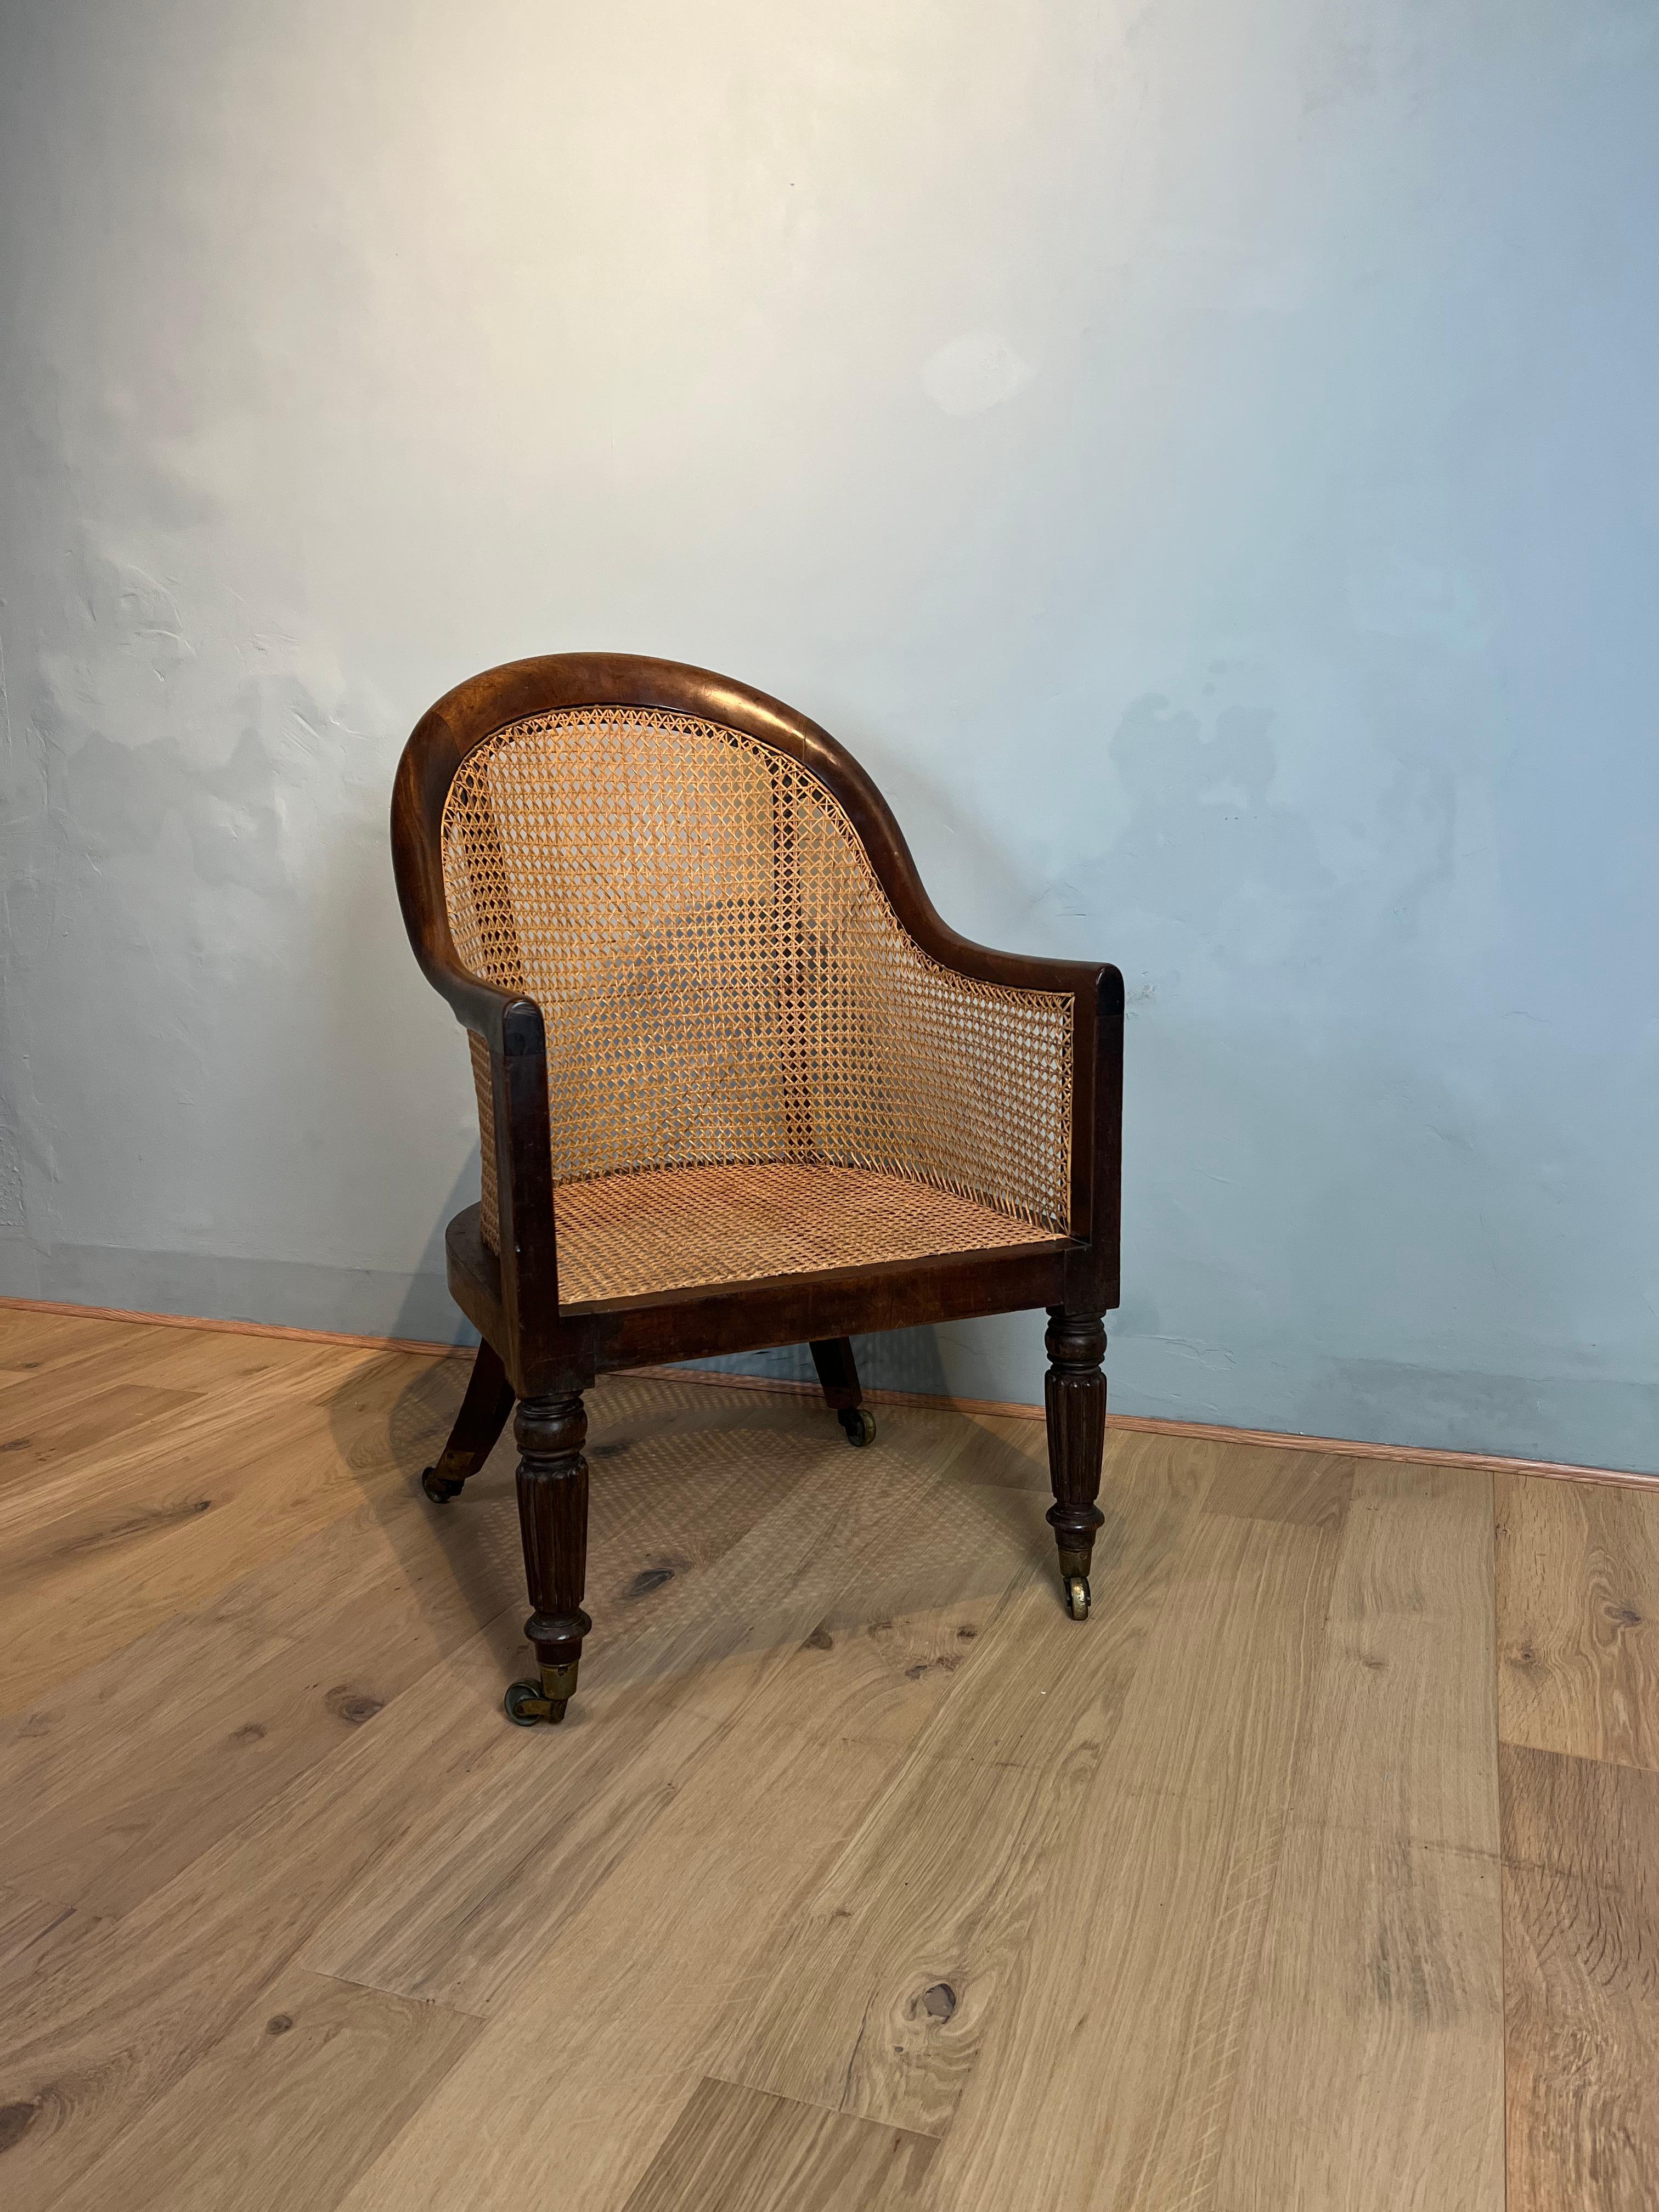 This Regency mahogany Bergere arm chair has a delightful flowing shape to the cresting rail and back legs with elegant classic reeded turned front legs, finishing on brass casters. The traditional caning is in excellent condition and the mahogany